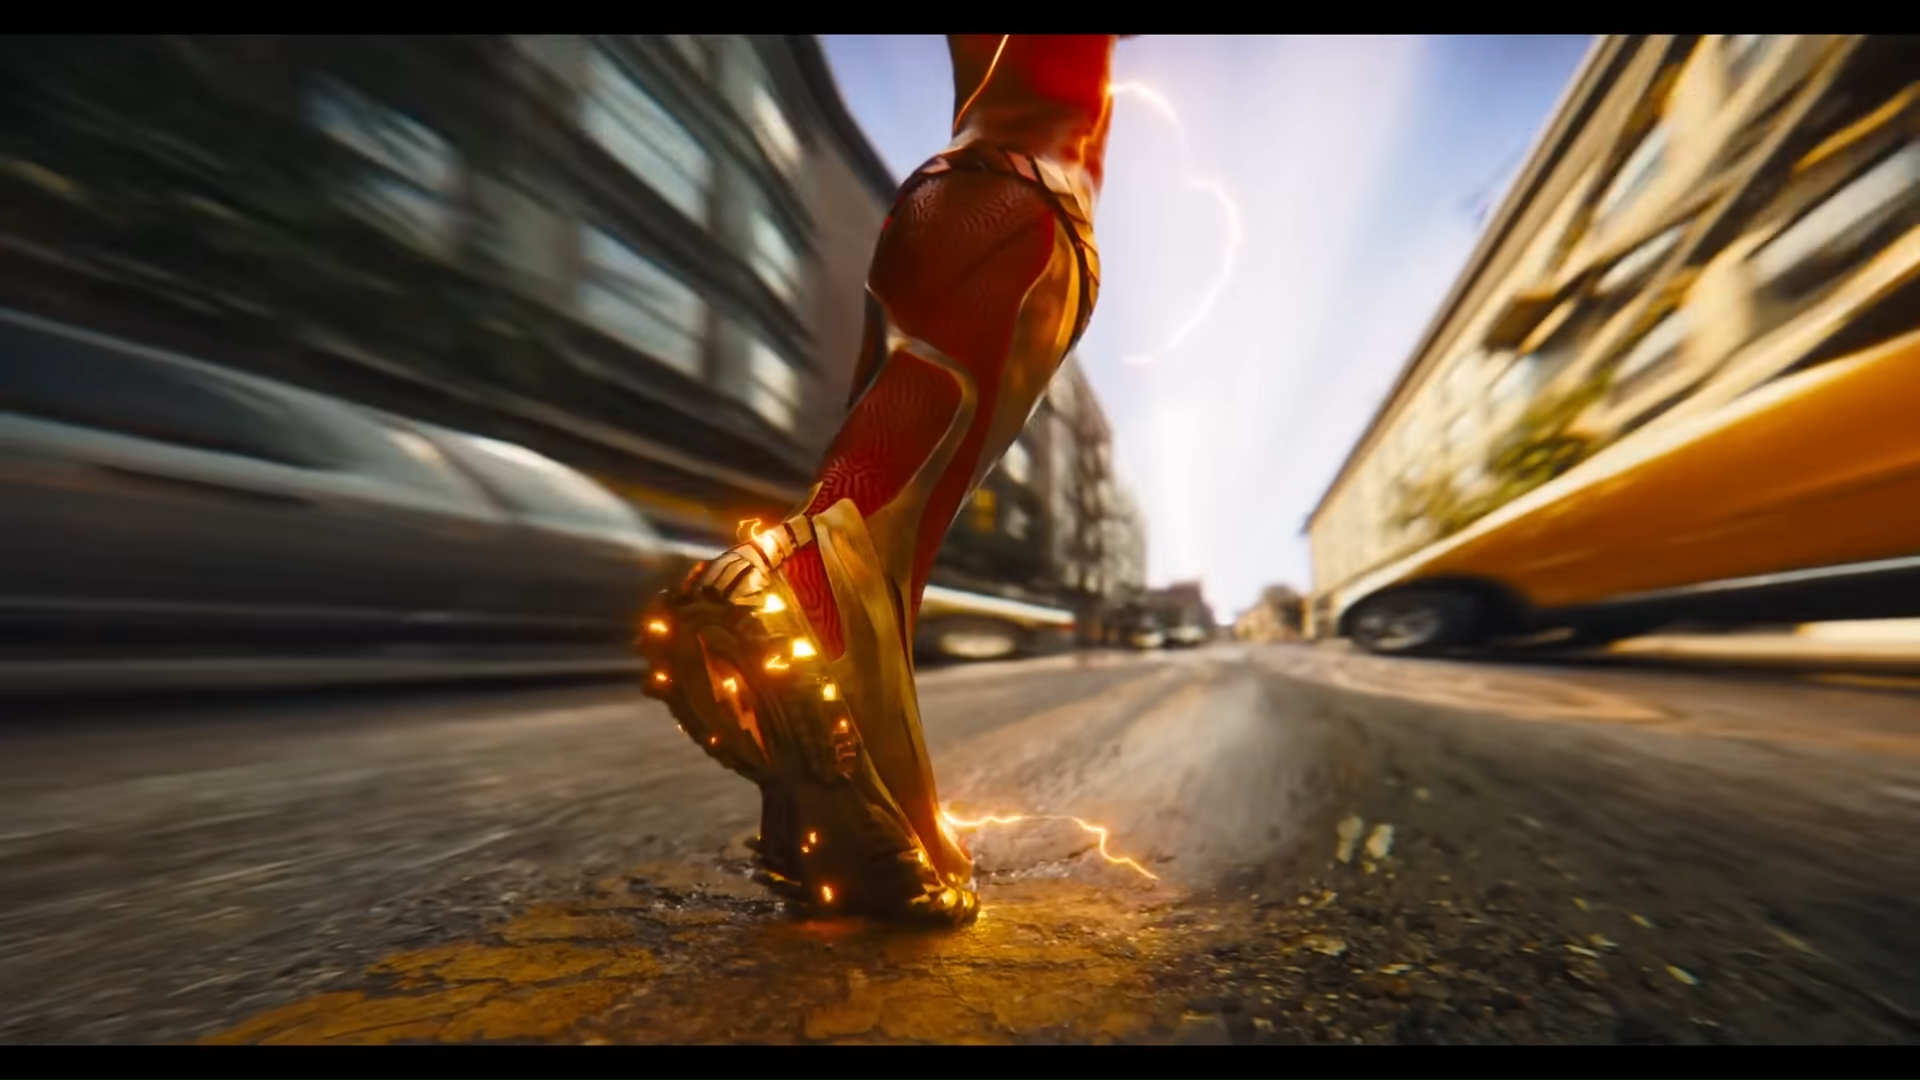 The 'Flash' Trailer Leaks Superman, Batman, and More Confirmed